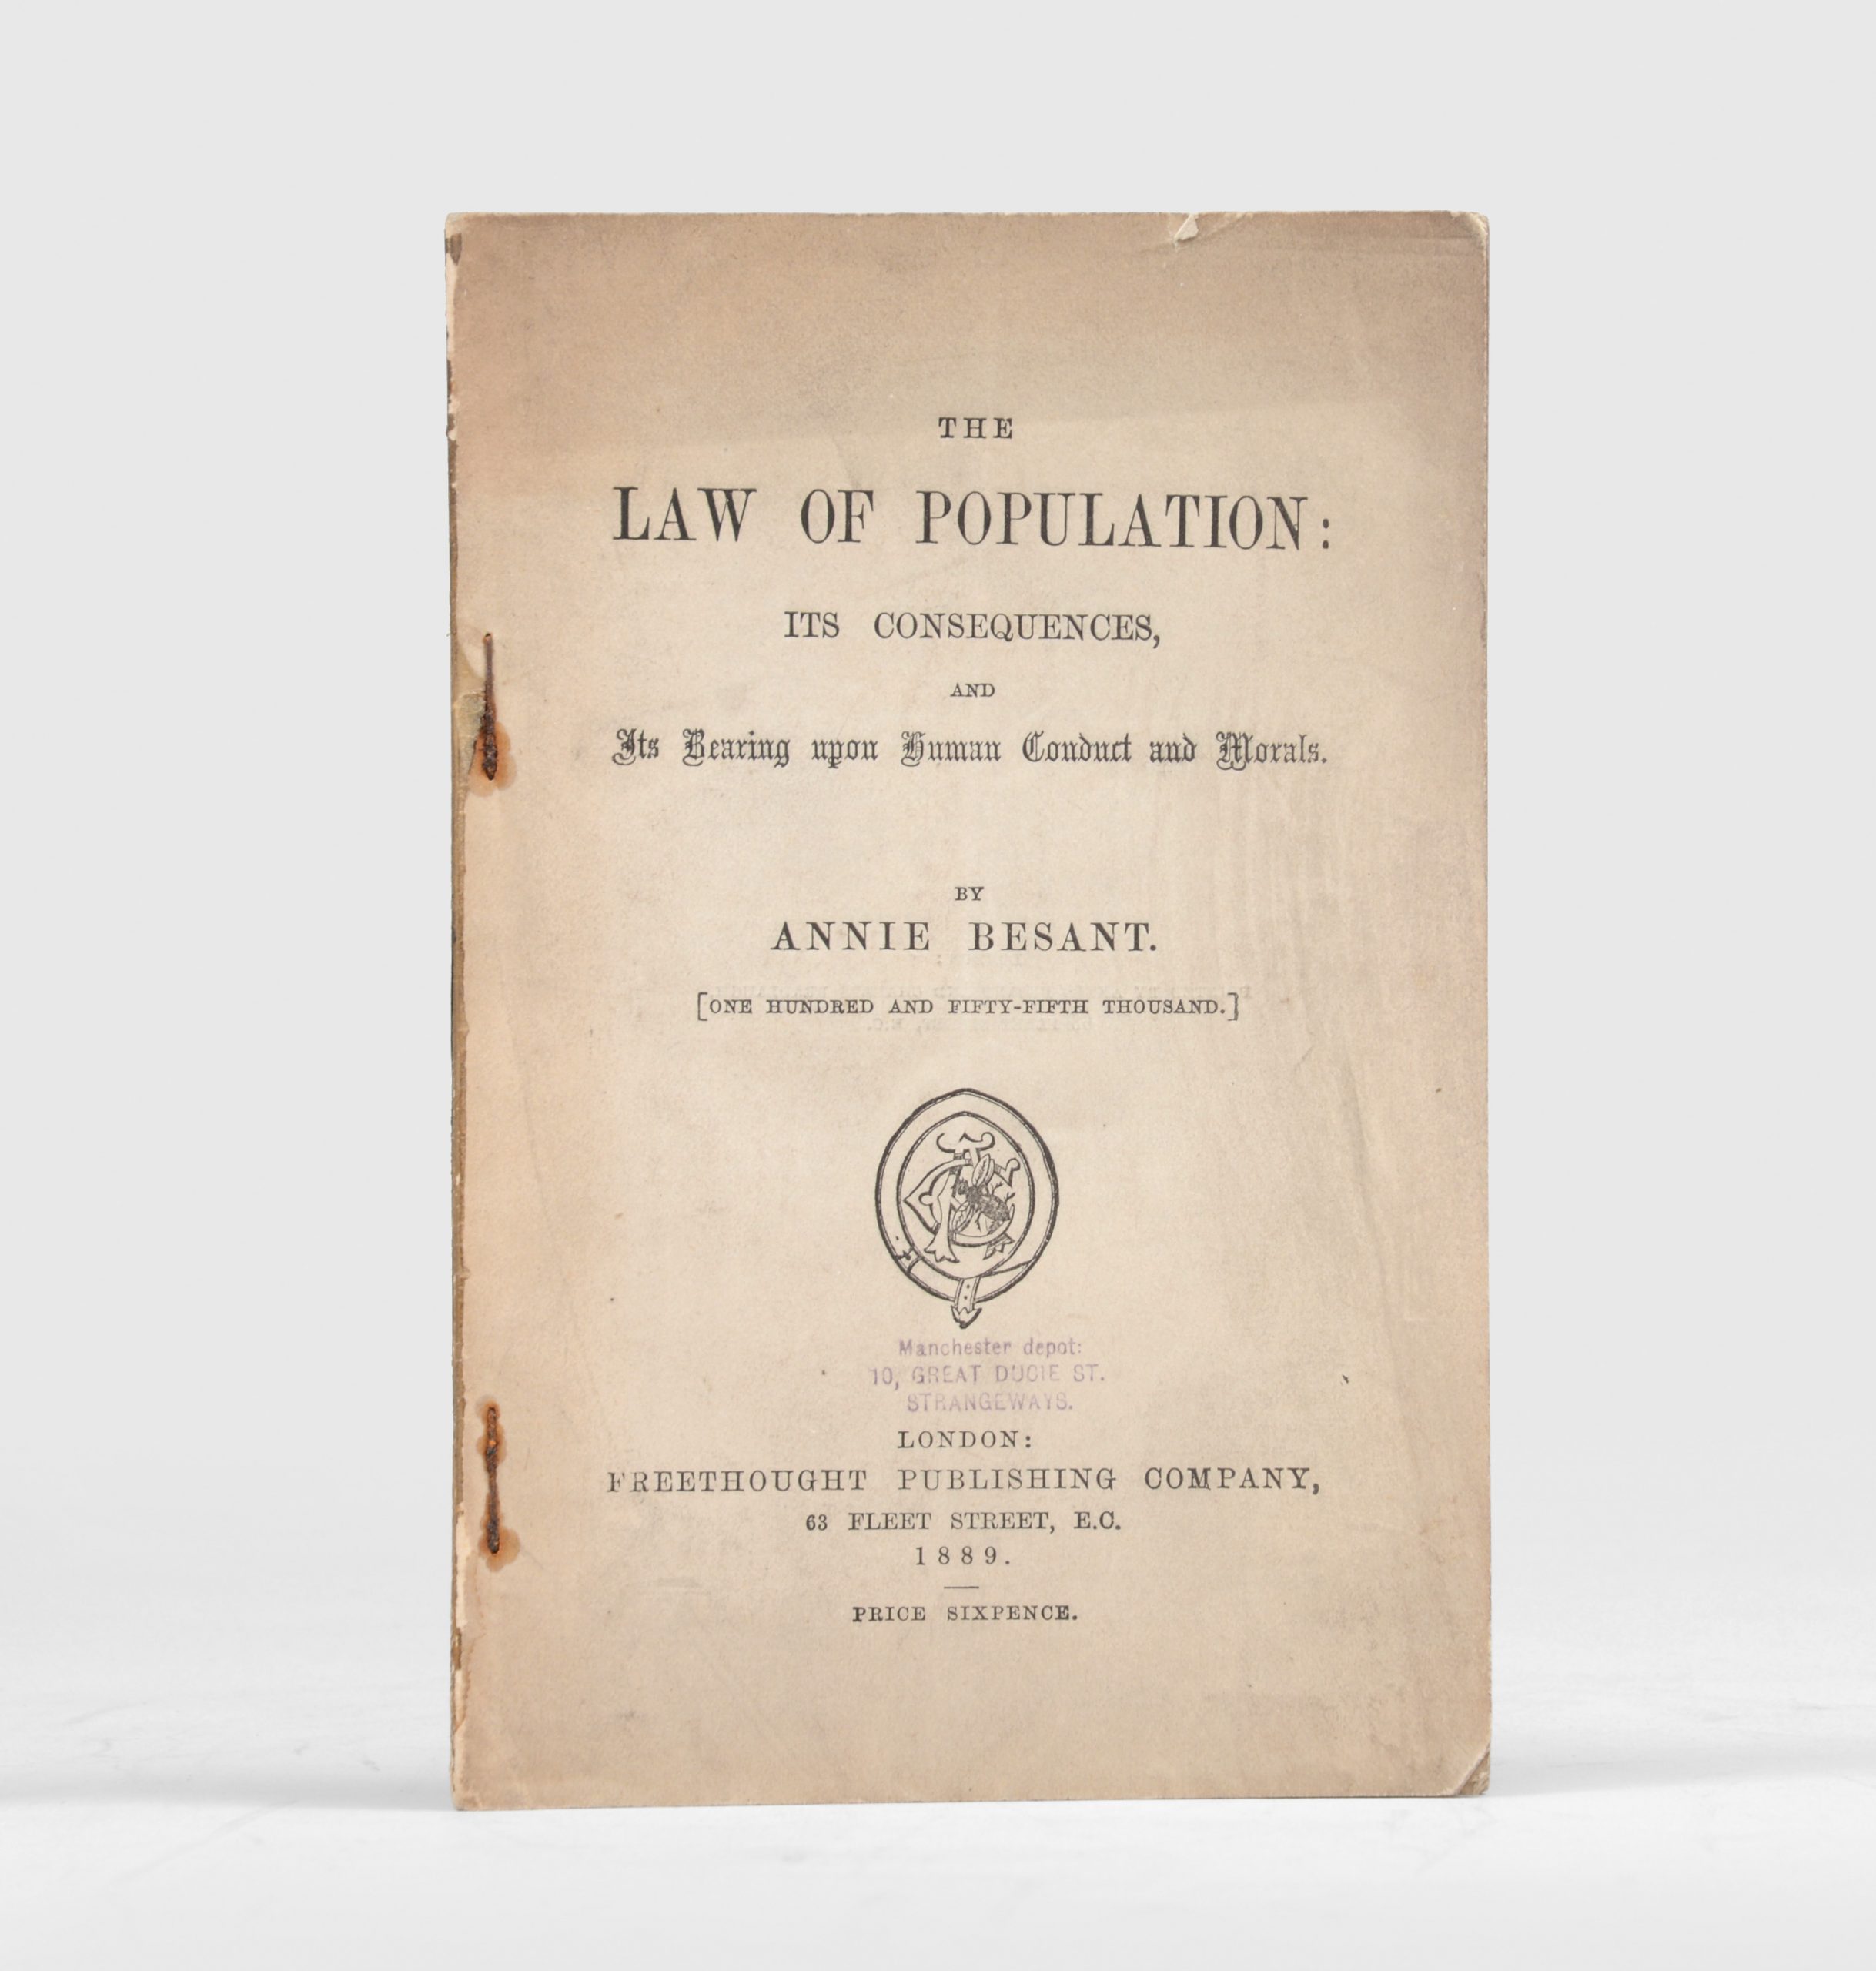 BESANT, Annie. The Law of Population